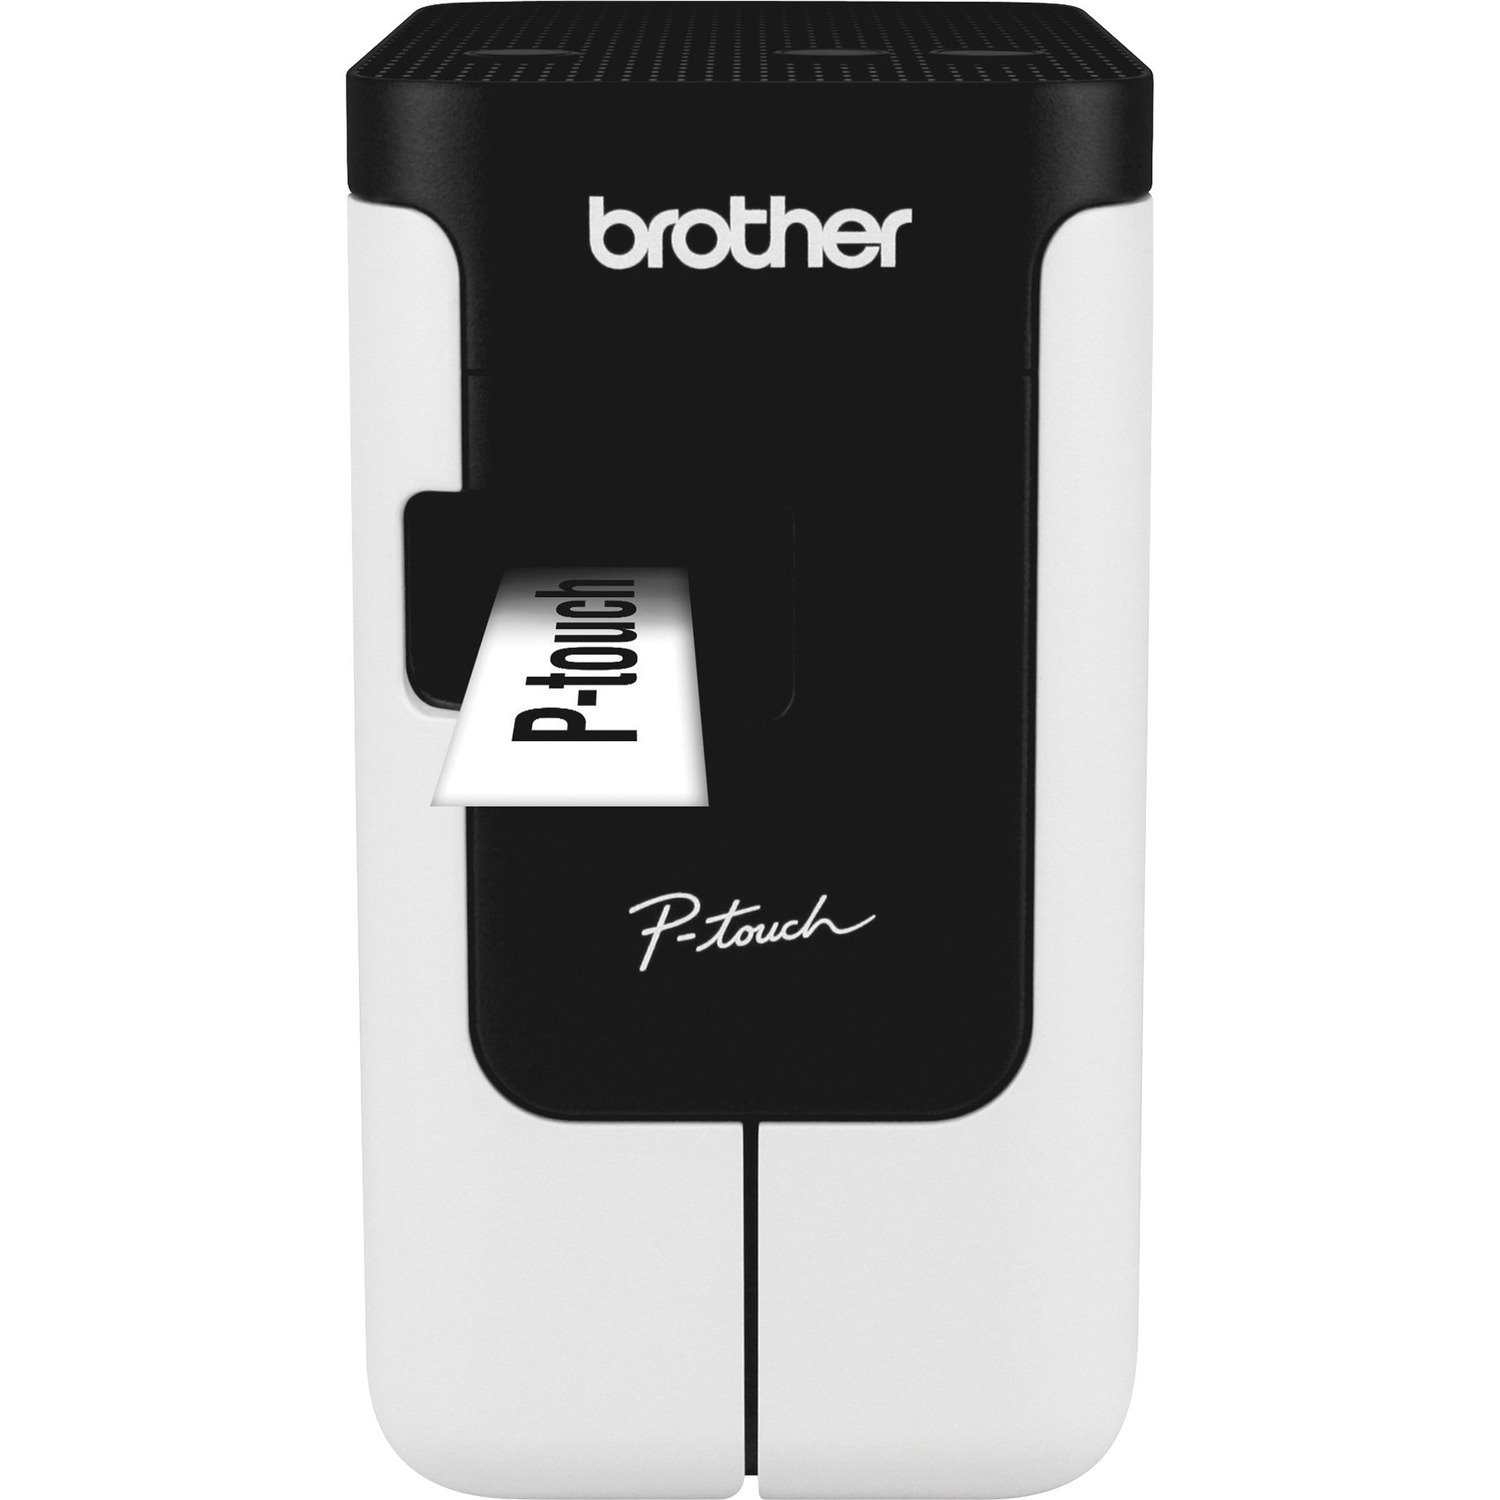 Brother P-touch PT-P700 Electronic Label Maker